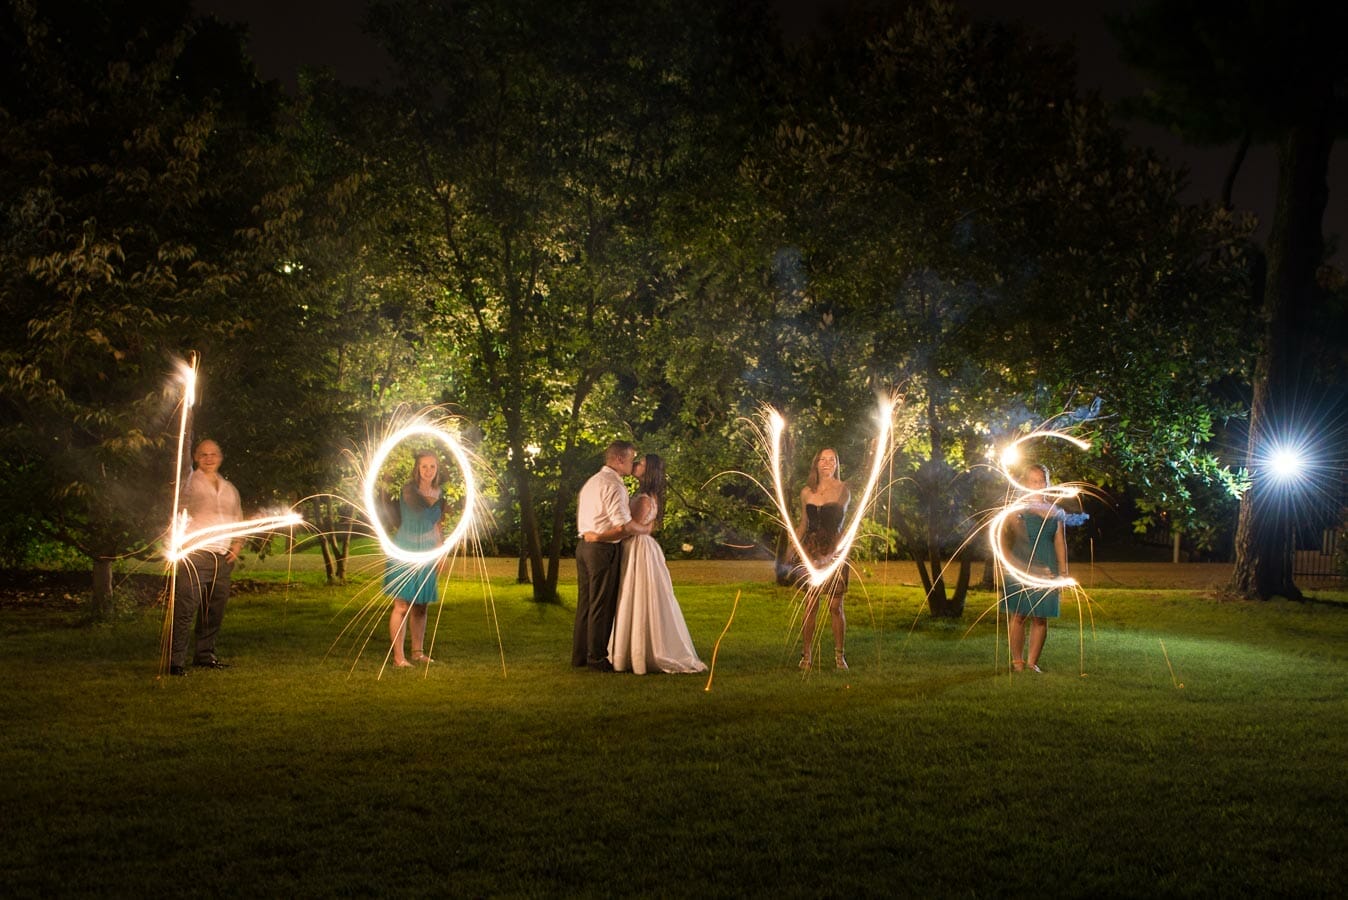 Spelling love with sparklers